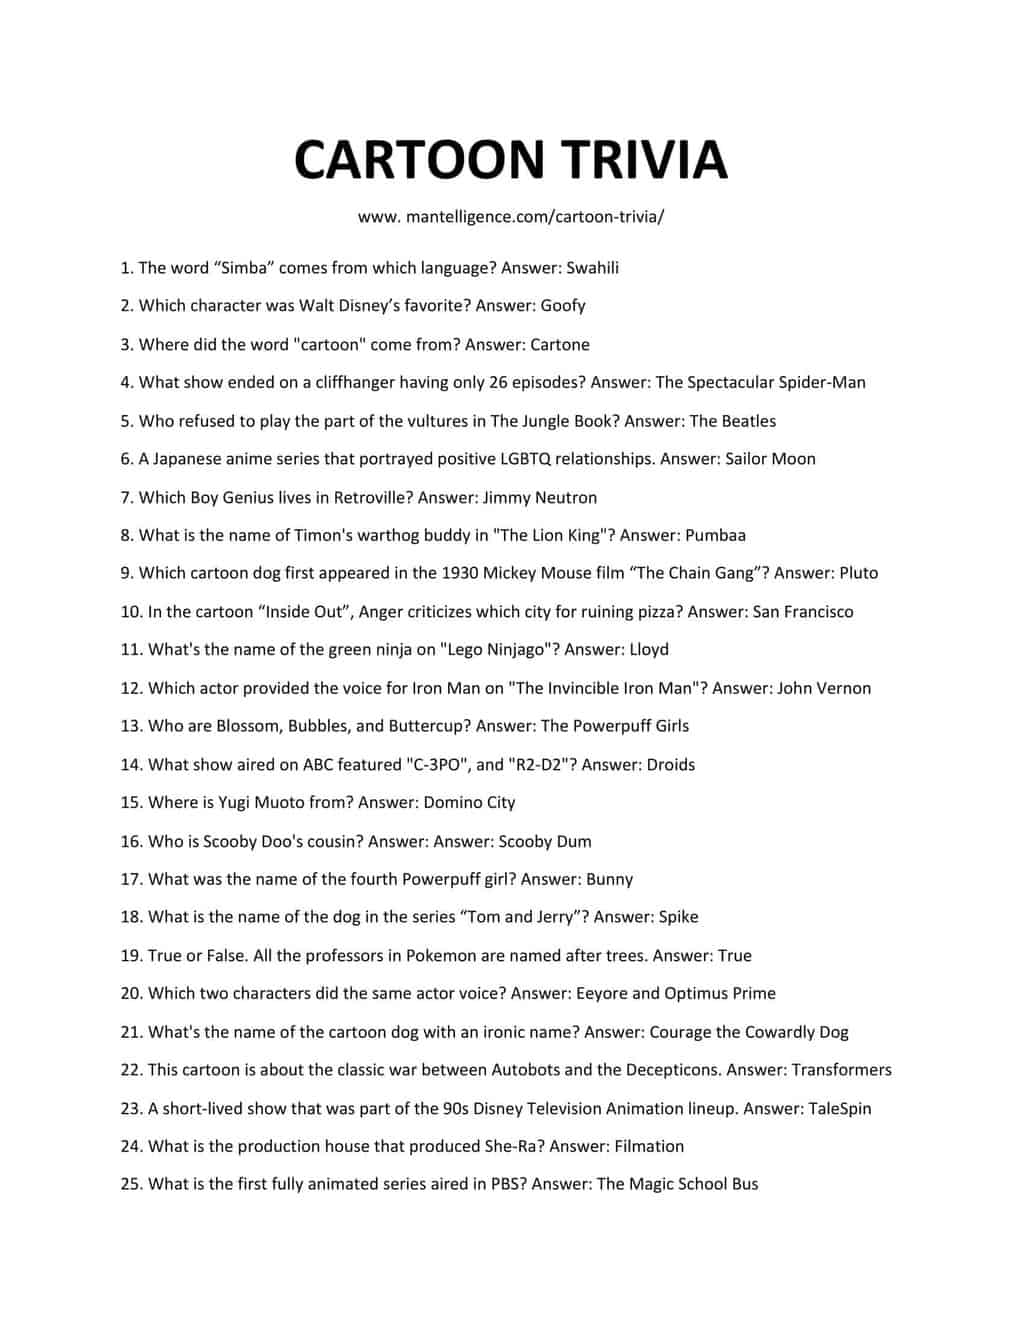 36 Best Cartoon Trivia Questions And Answers - Spark fun conversations.